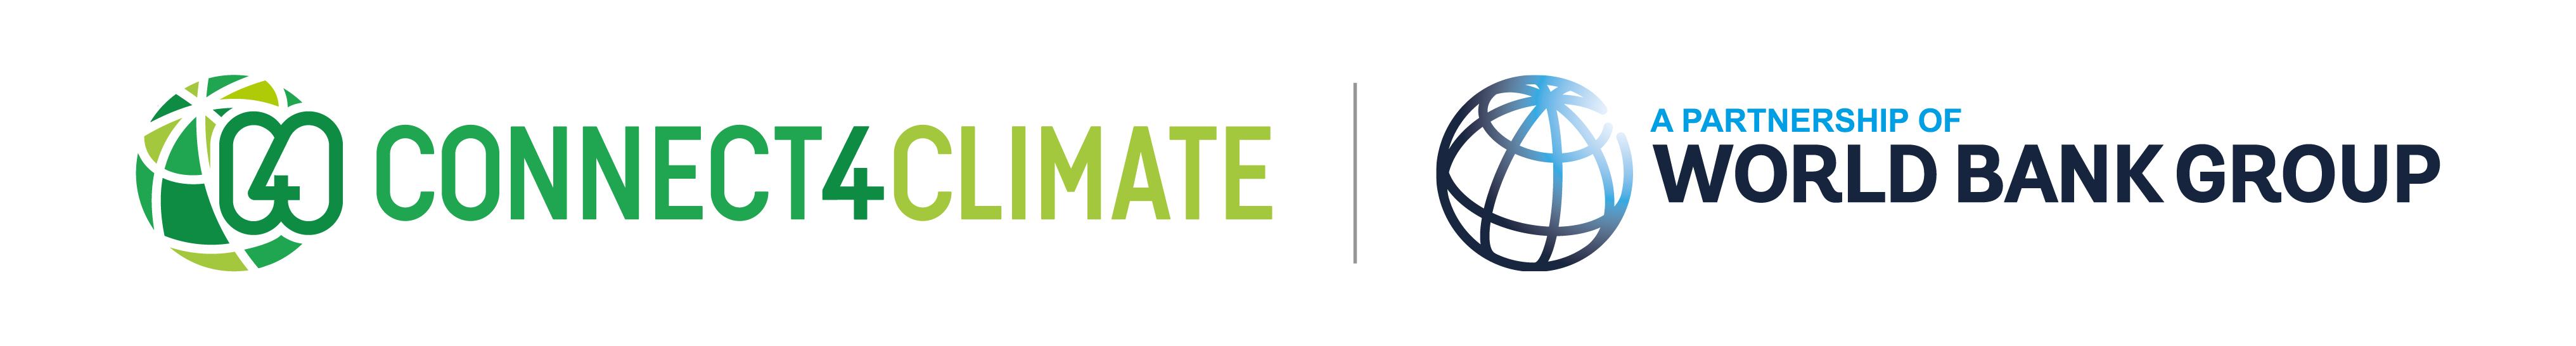 Connect4Climate Logo (A Partnership of the World Bank Group)